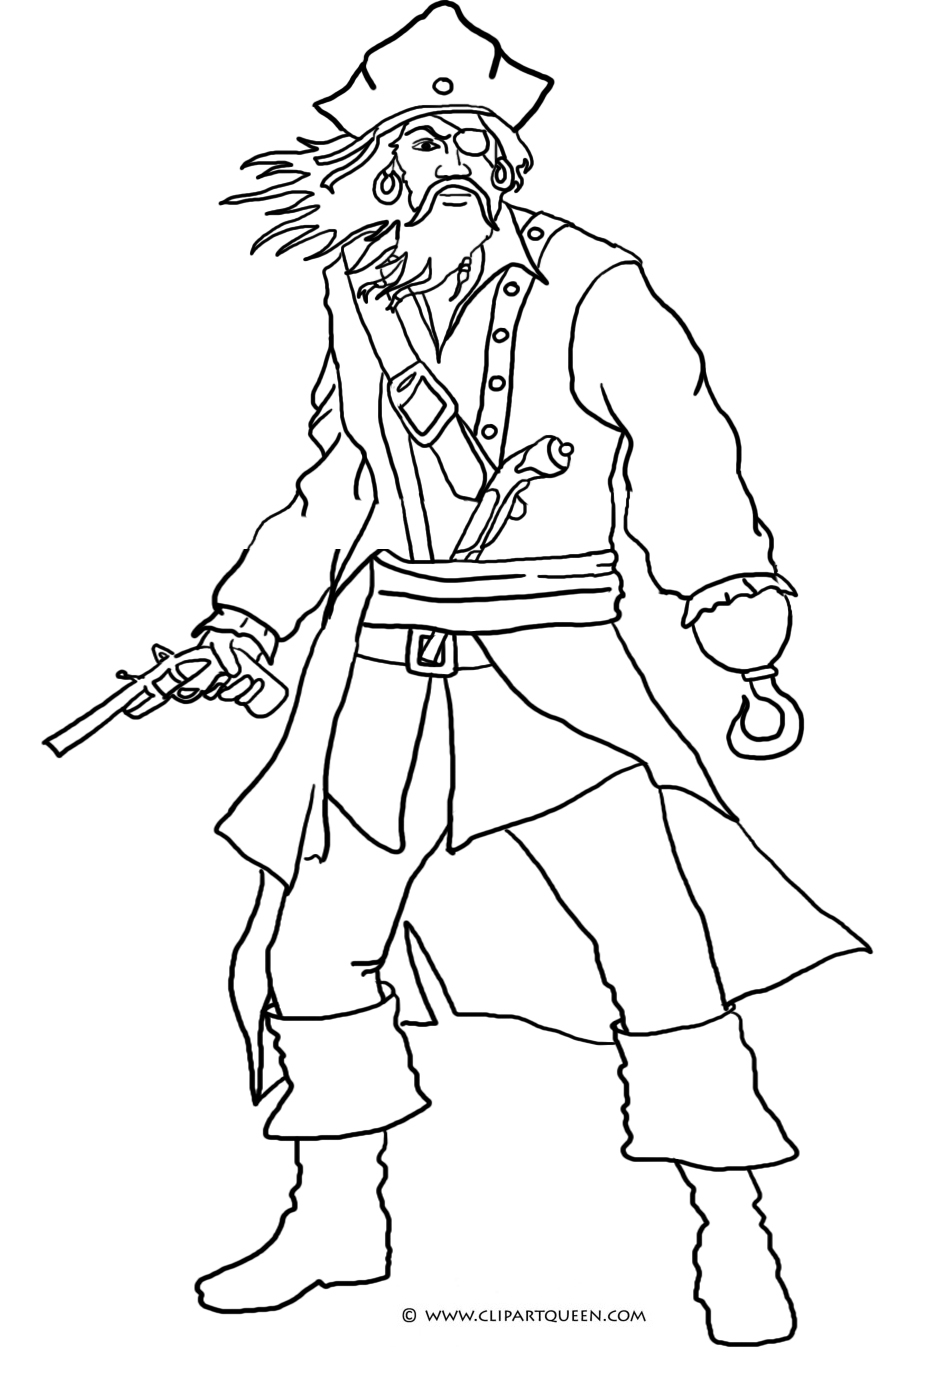 Easy Pirate Drawing at GetDrawings | Free download